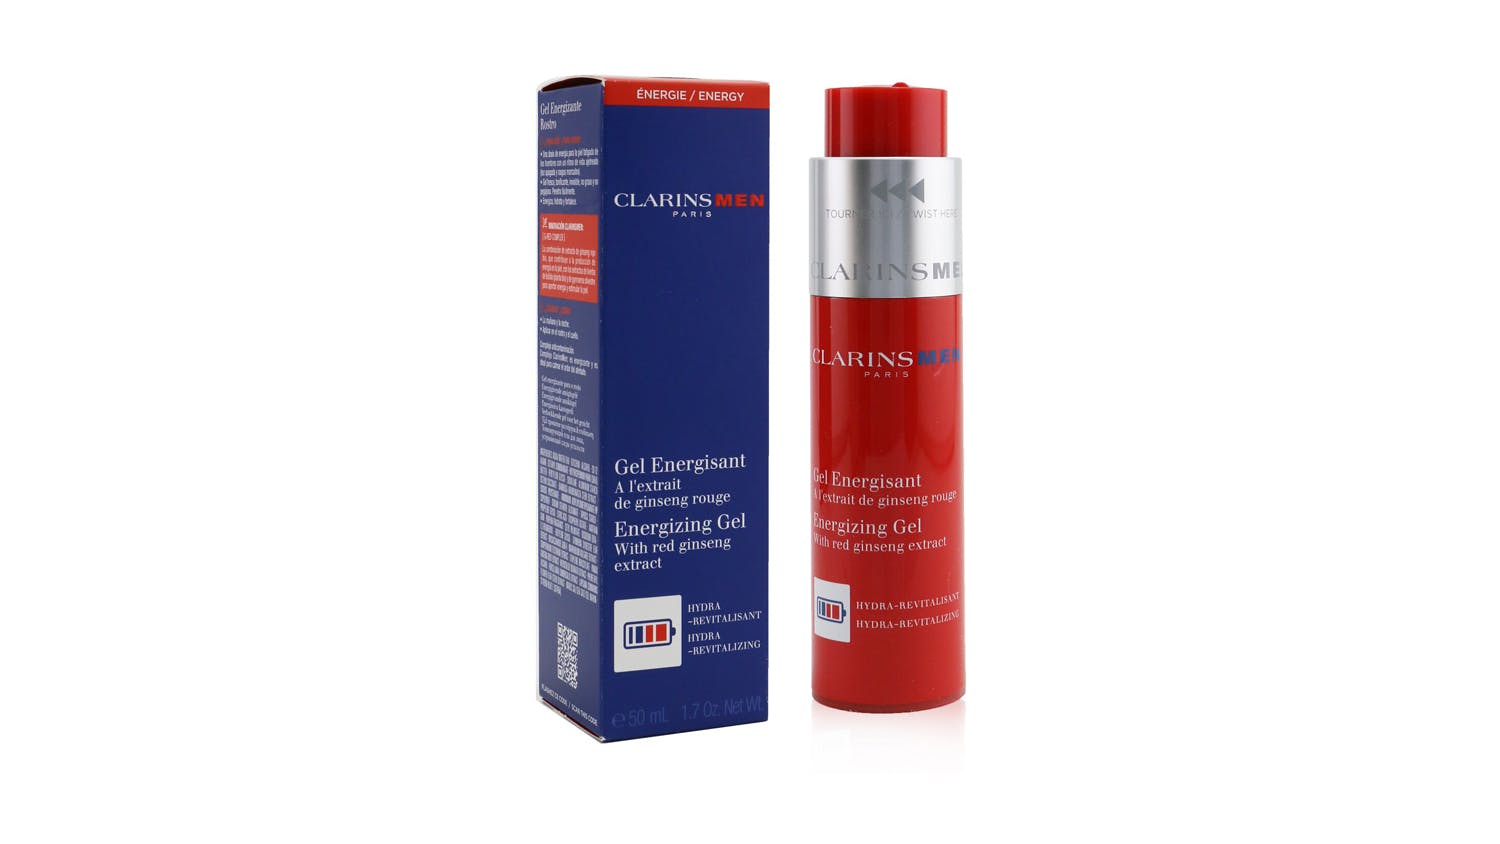 Clarins Men Energizing Gel With Red Ginseng Extract - 50ml/1.7oz